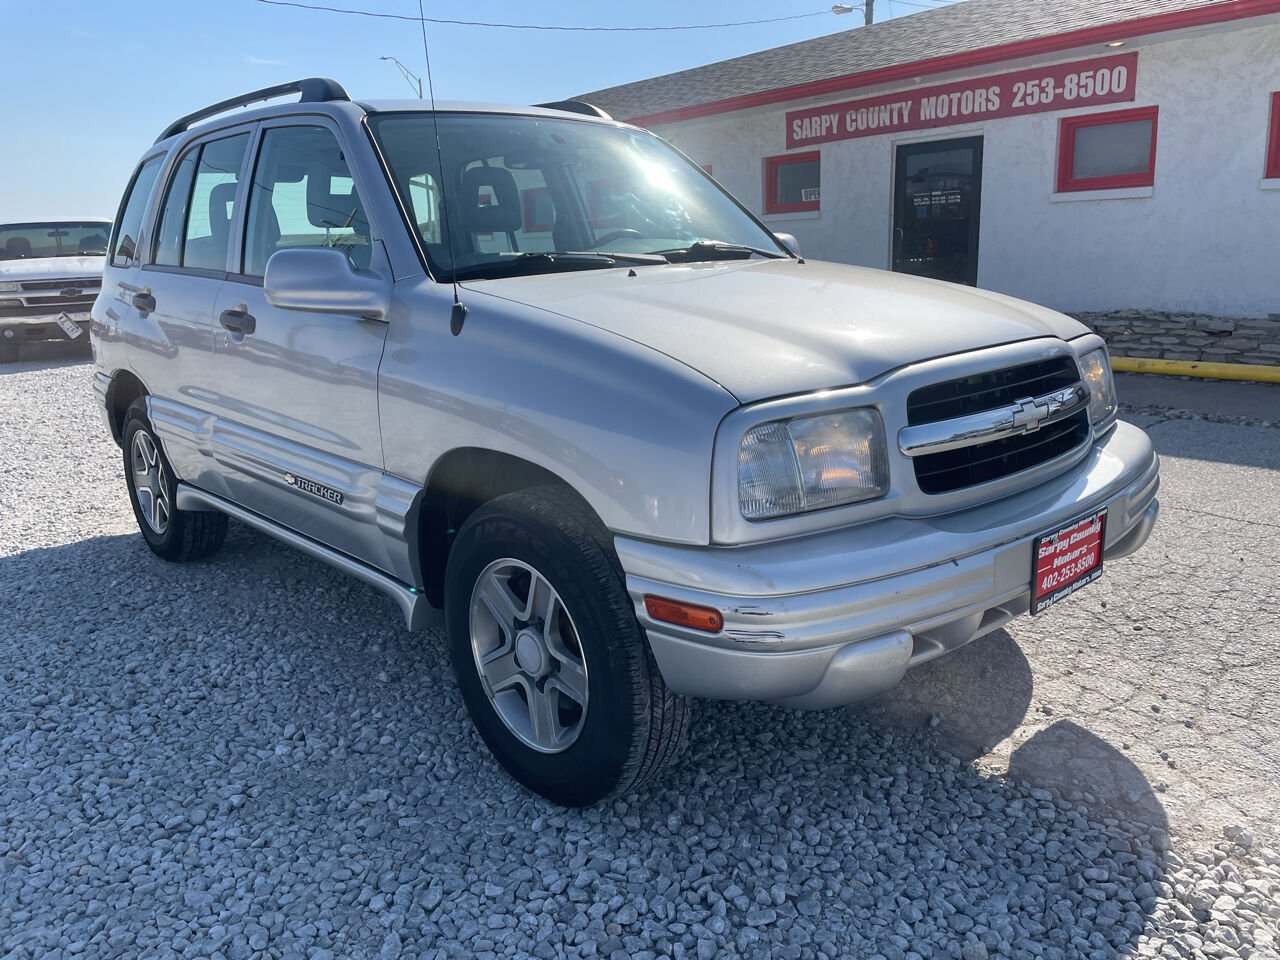 Used 2004 Chevrolet Tracker for Sale Right Now - Autotrader